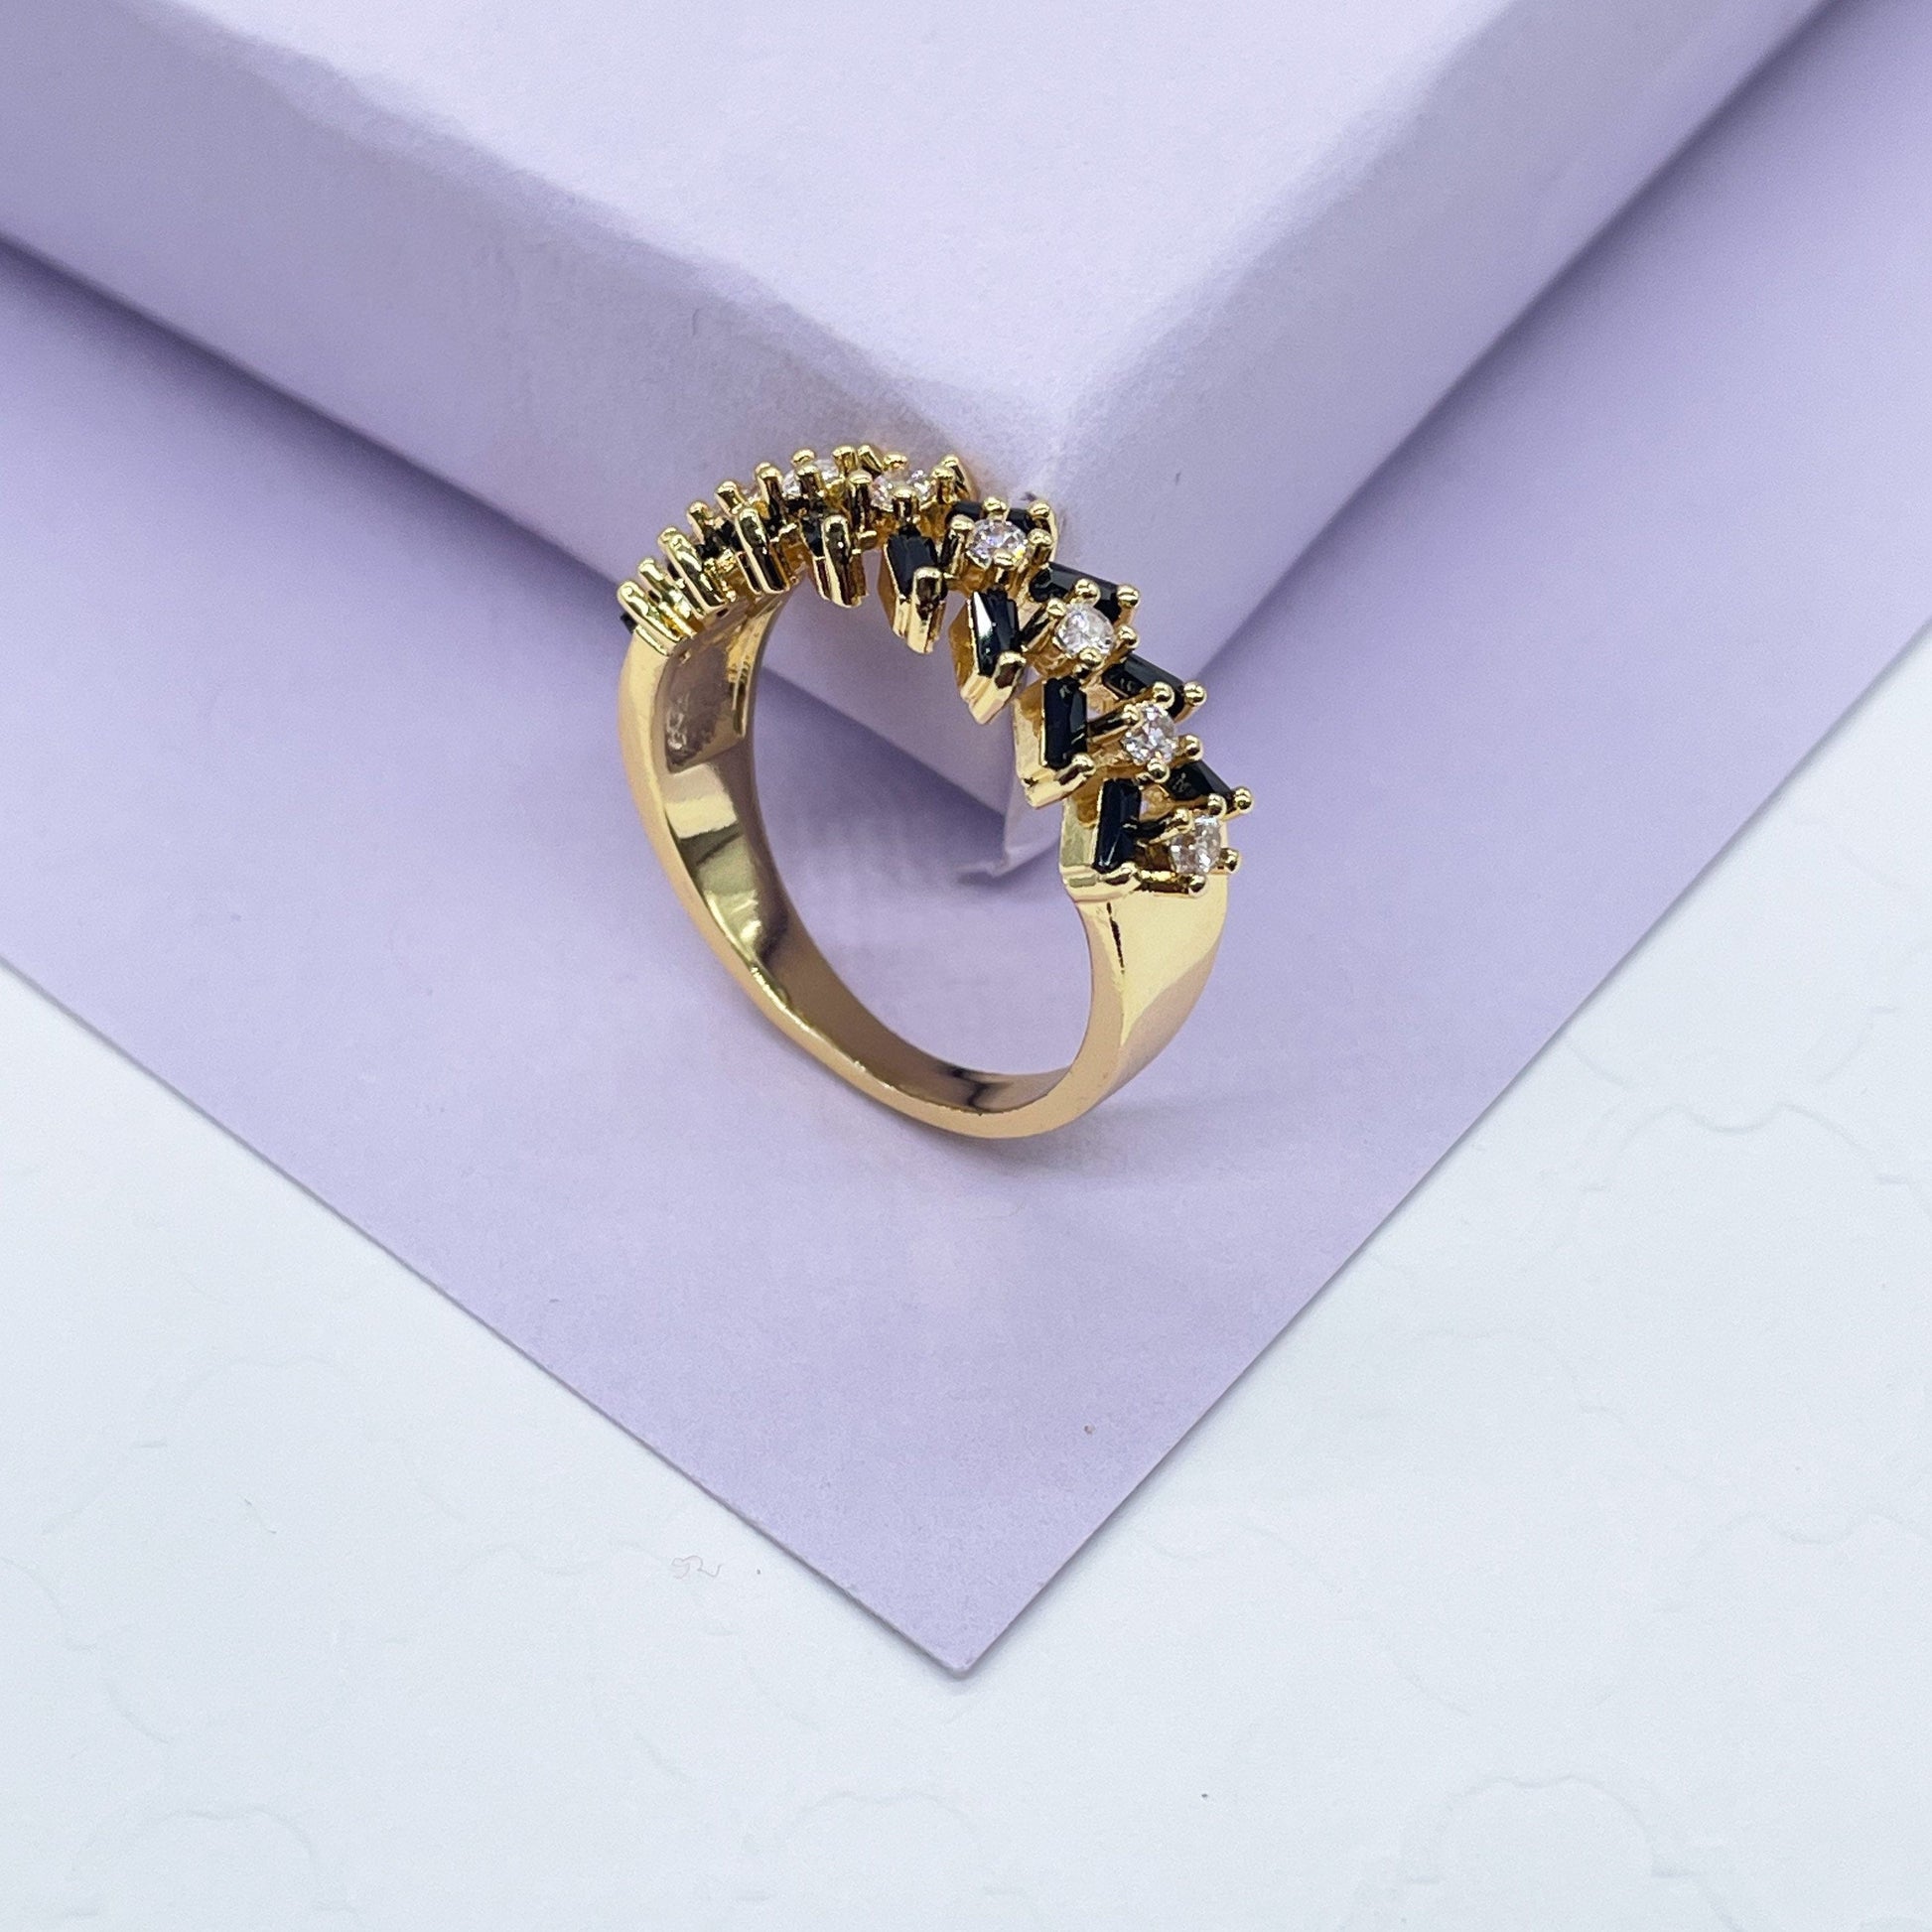 18k Gold Filled Black Baguette Stone Ring, With White Stone Row in between